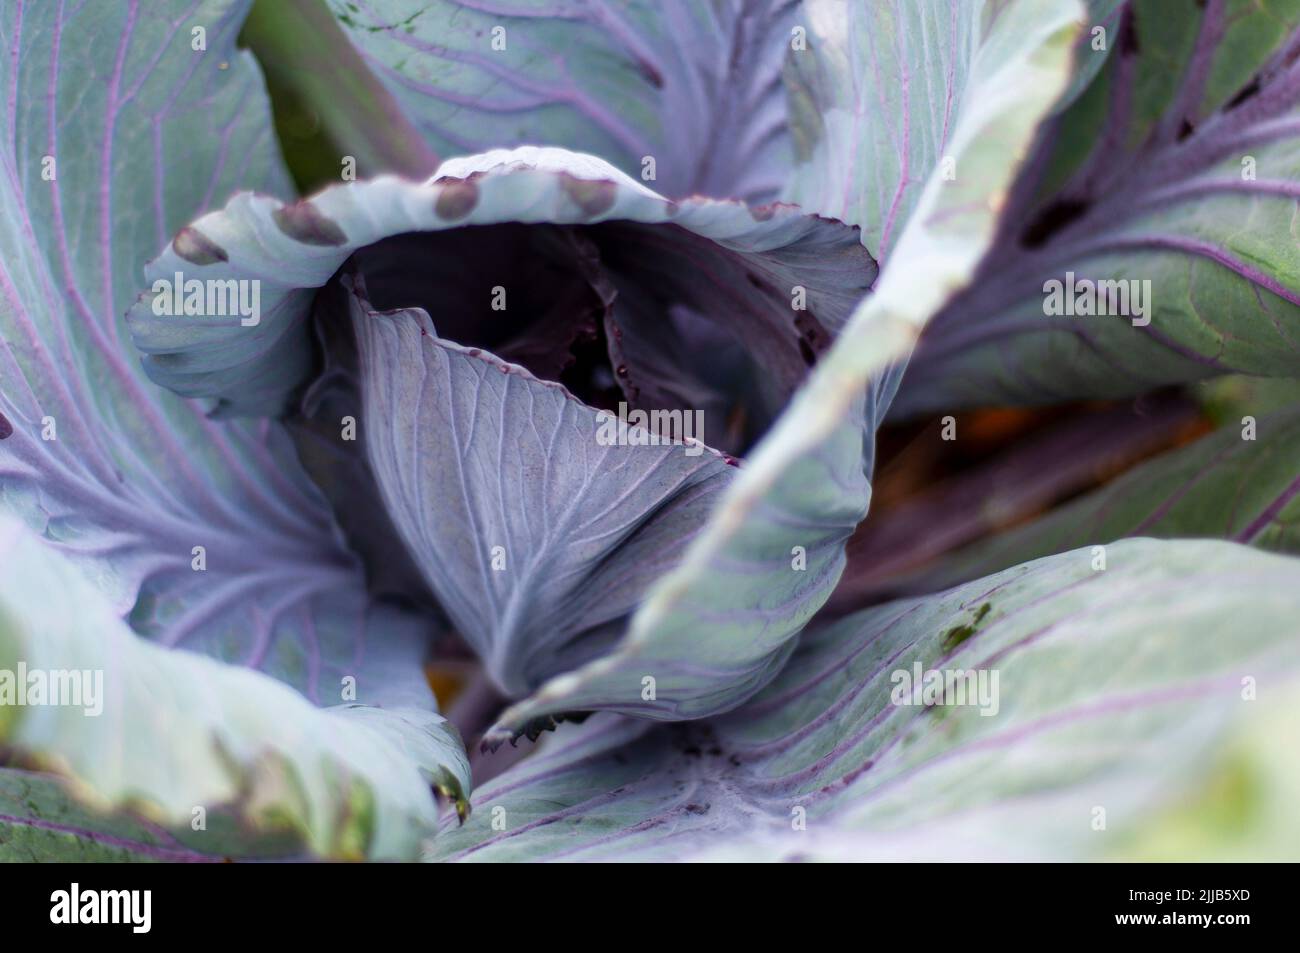 Cultivated cabbage in the garden. Stock Photo